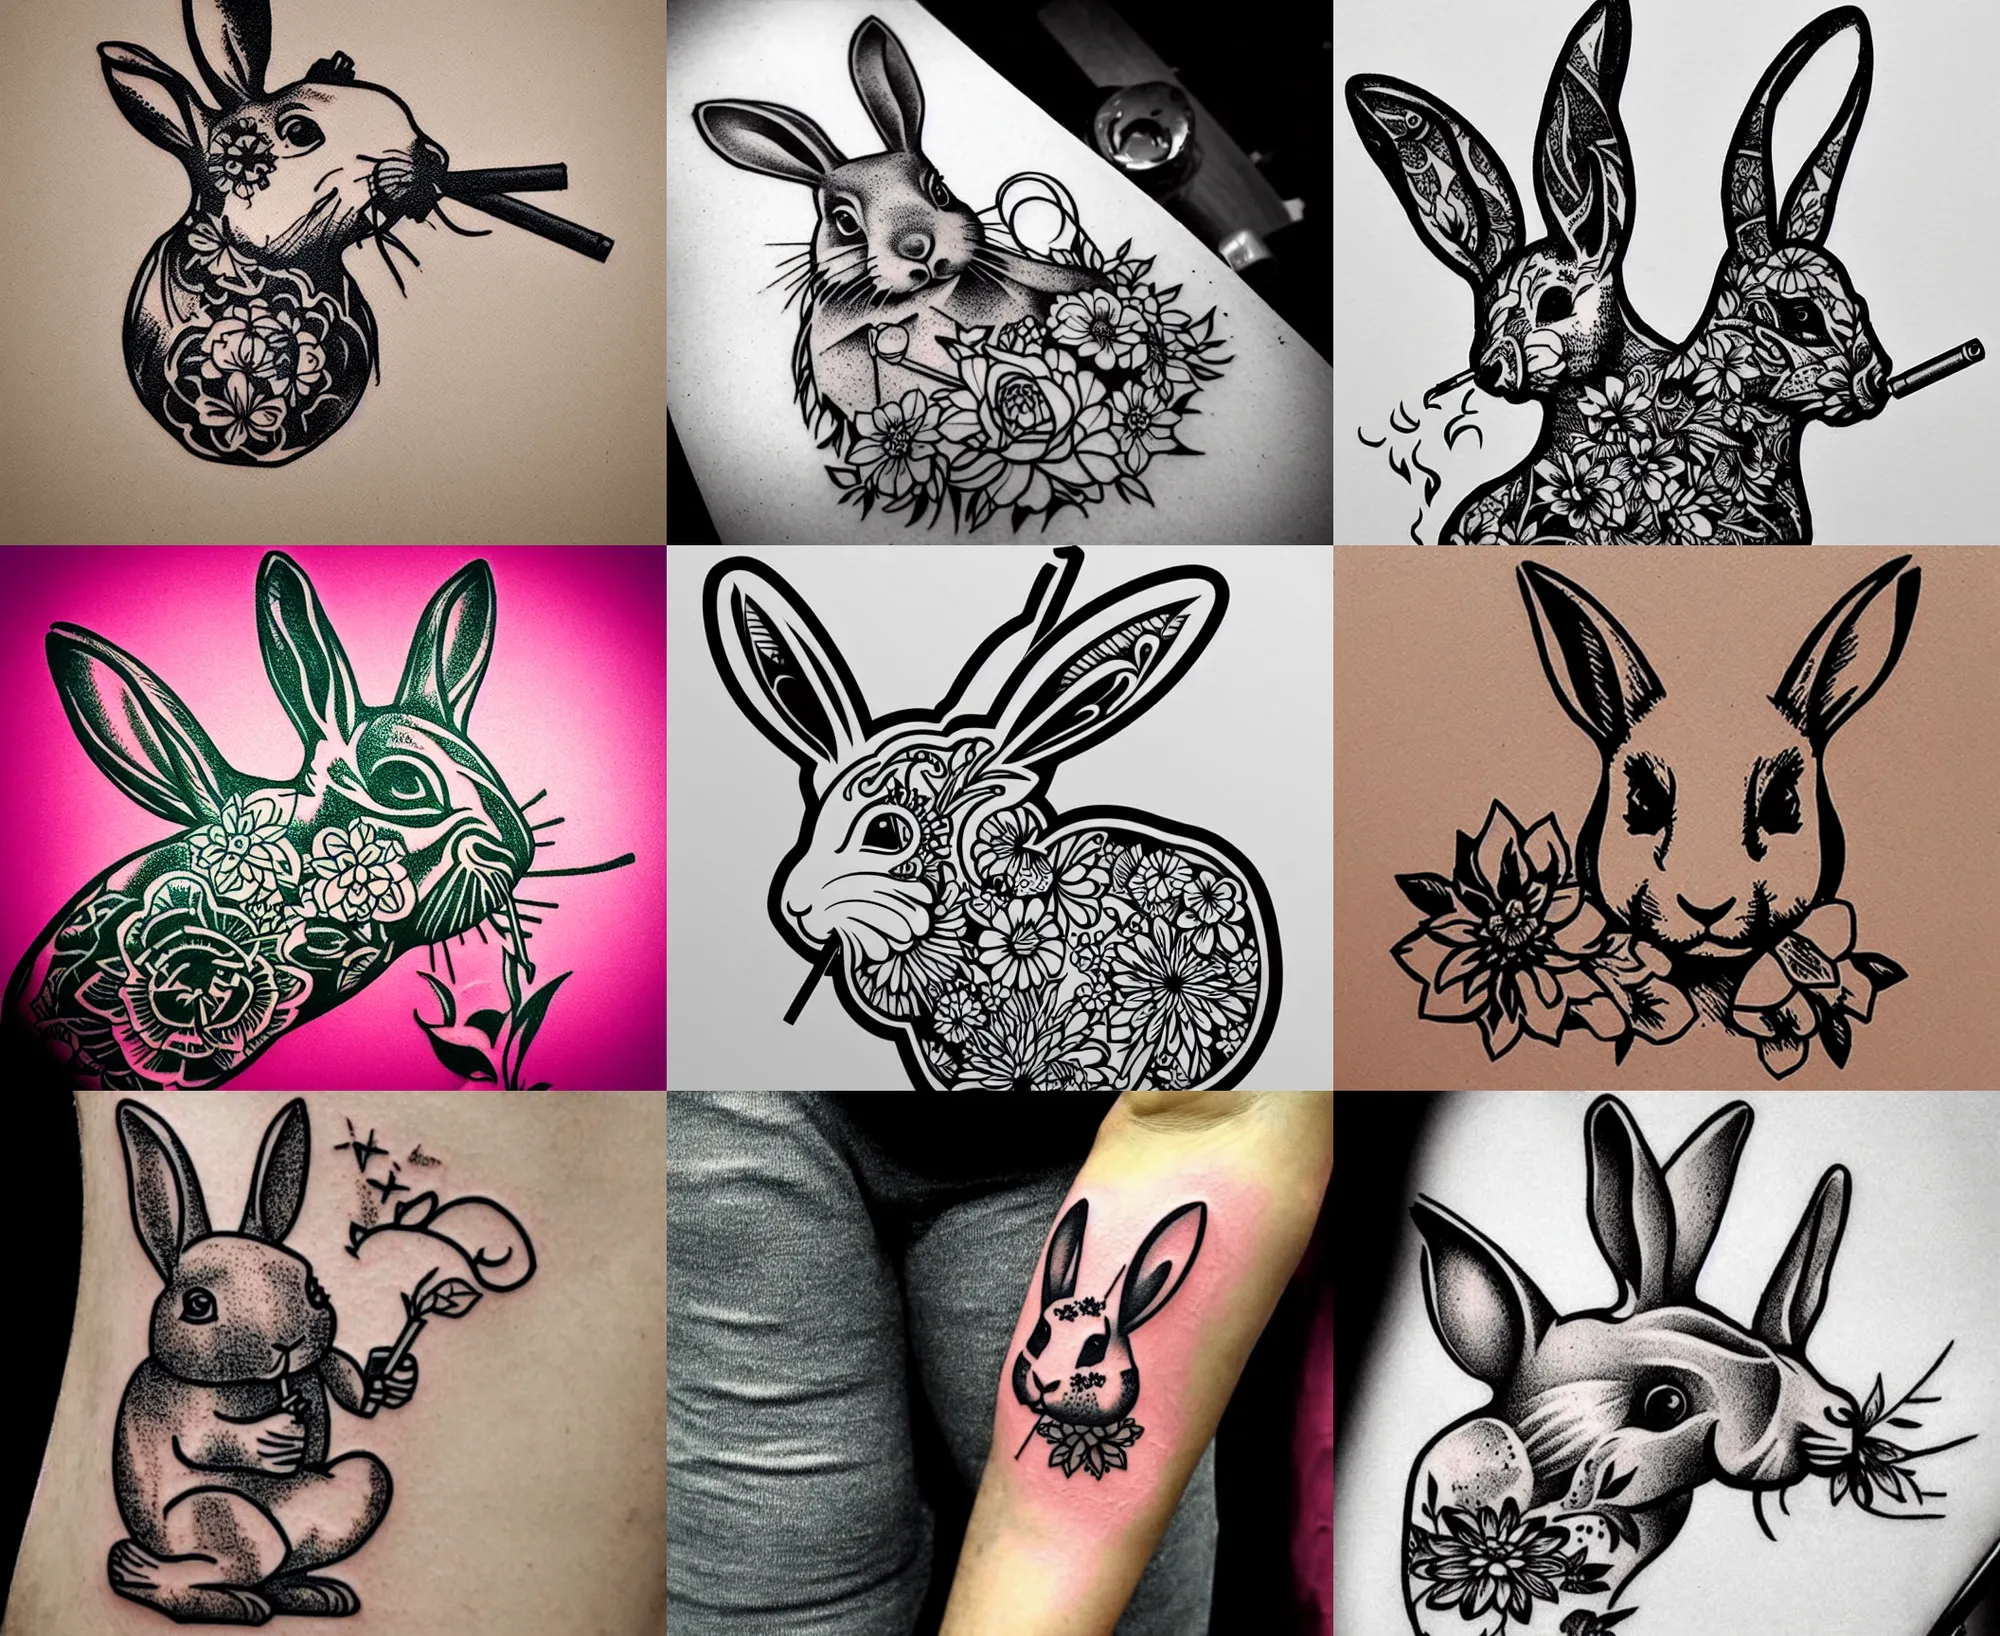 The getting of the rabbit tattoo | Kelly's Unnecessary Blog